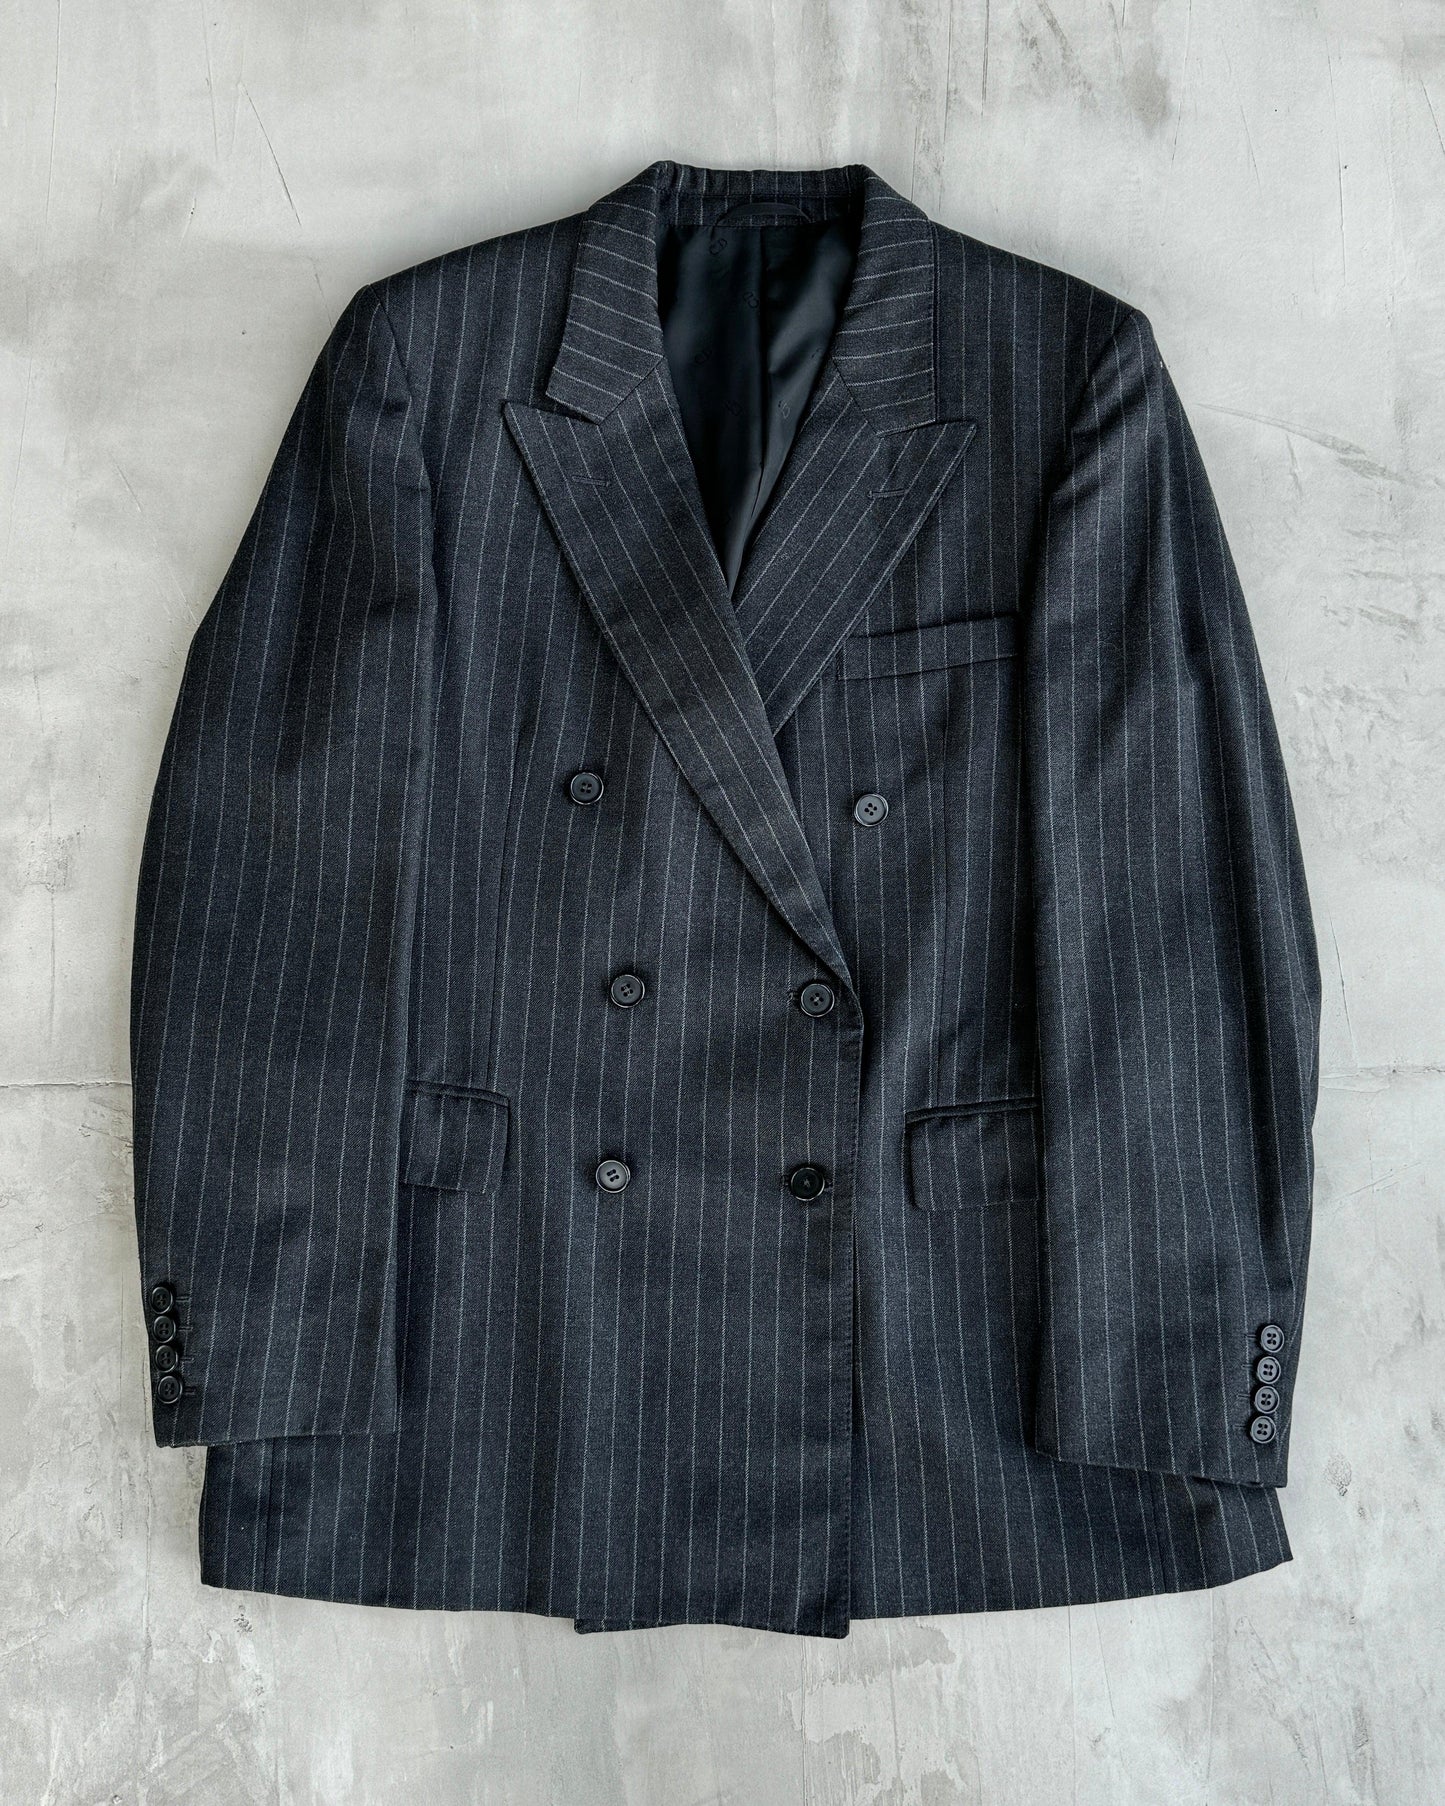 CHRISTIAN DIOR MONSIEUR DOUBLE BREASTED WOOL PINSTRIPE SUIT - 40R / M-L - Known Source